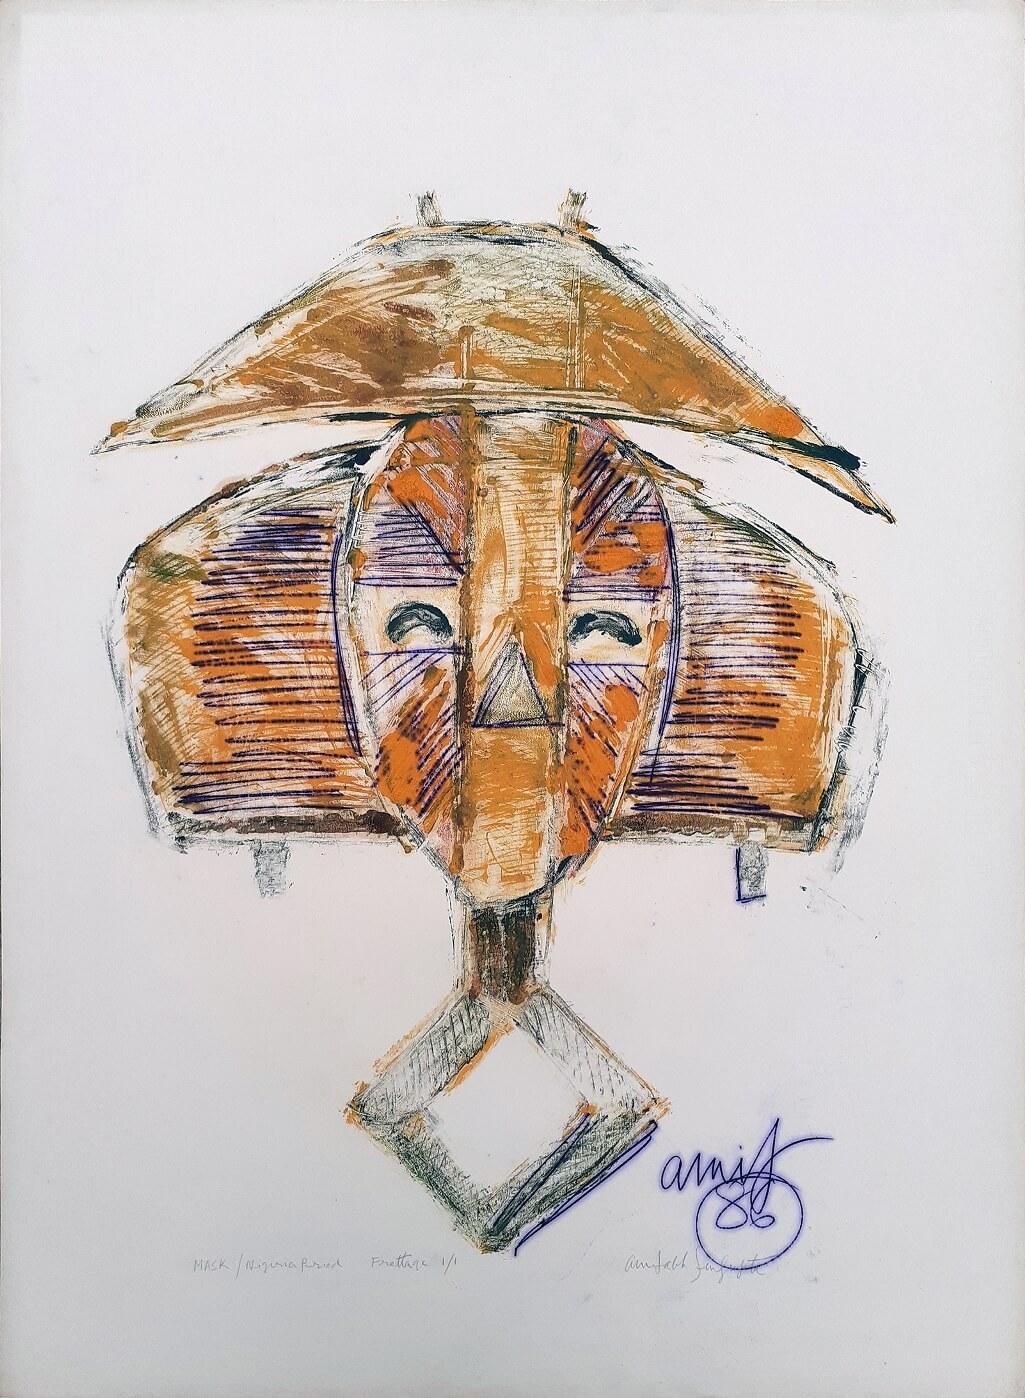 Amitabh Sengupta Abstract Painting - Mask Nigeria Period, Frottage on Paper, Edition 1/1 by Indian Artist "In Stock"